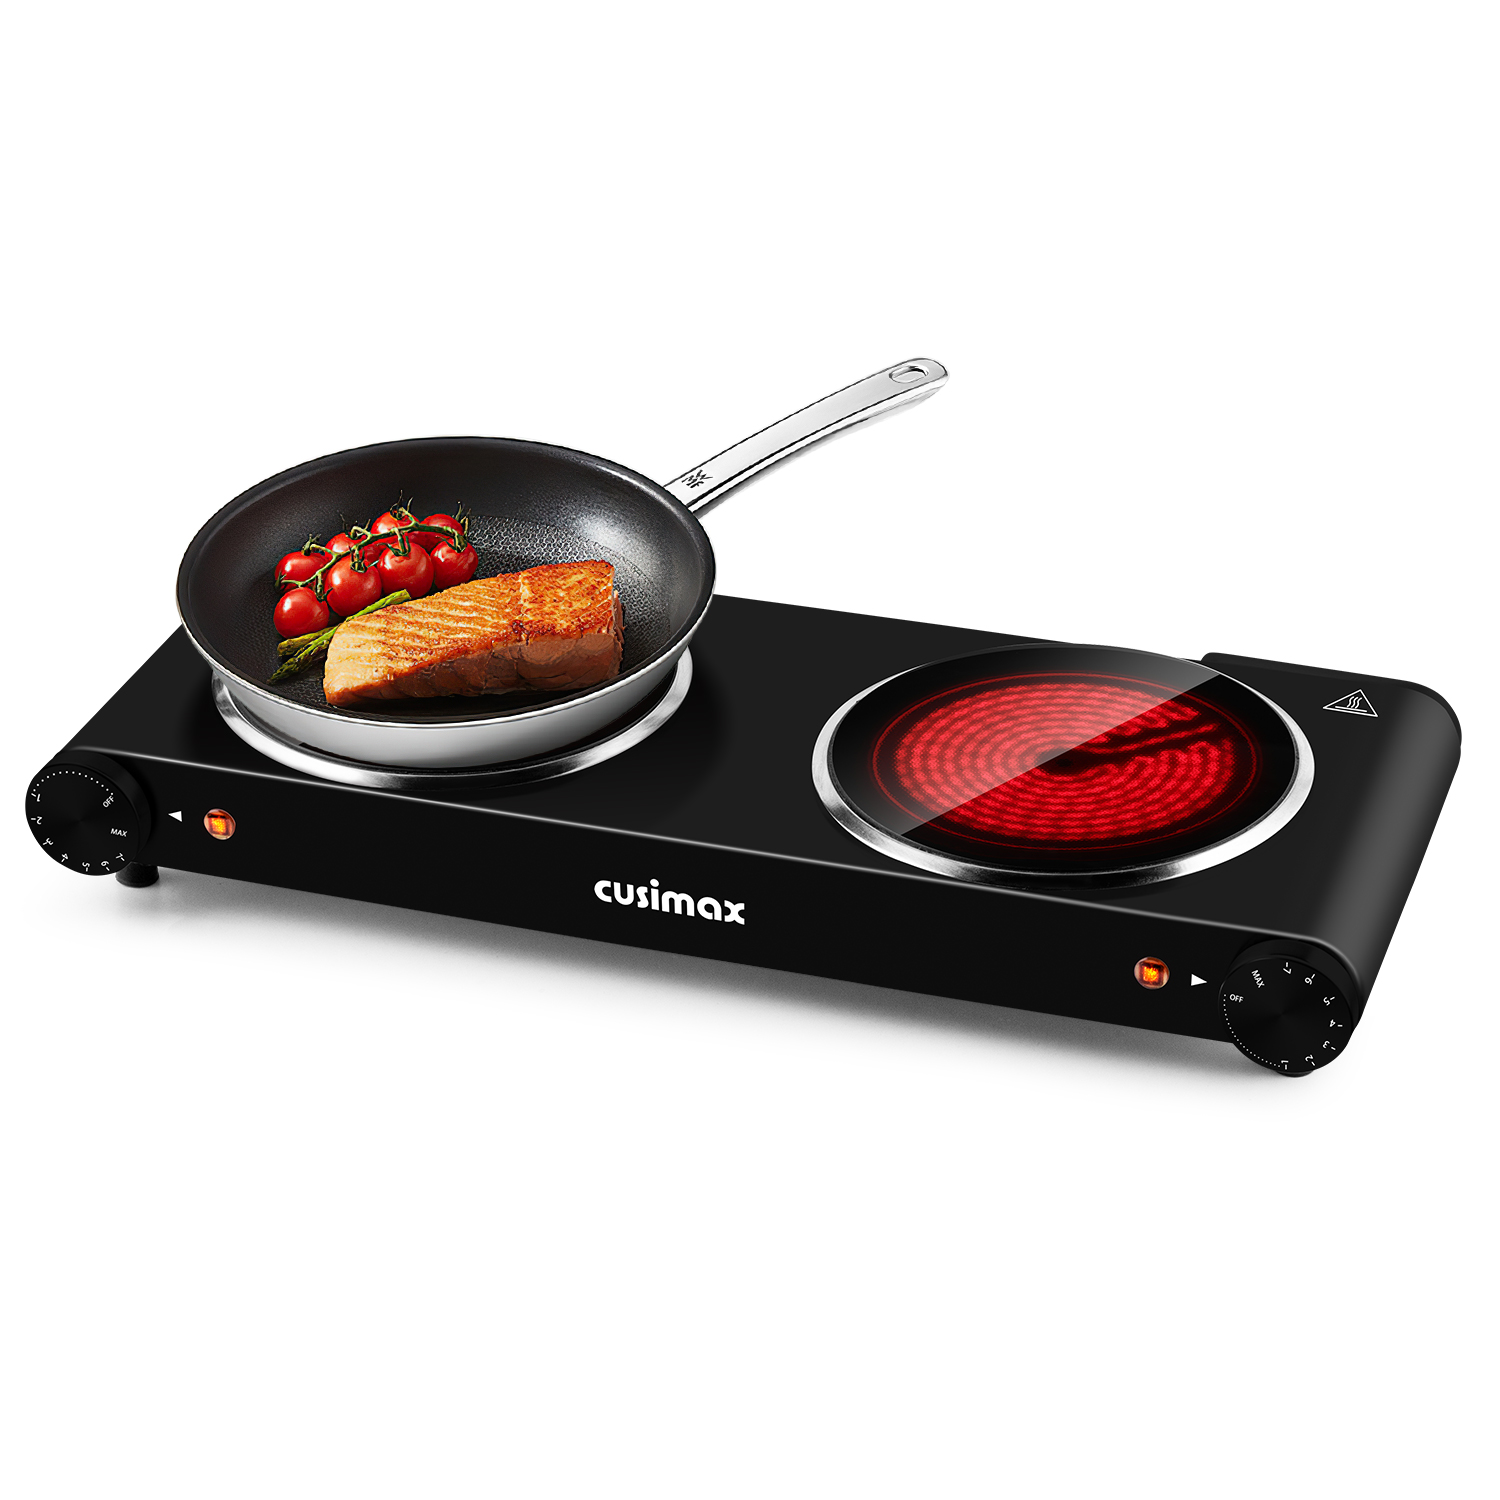 Cusimax 1800W Infrared Double Burner Electric Stove(UK)